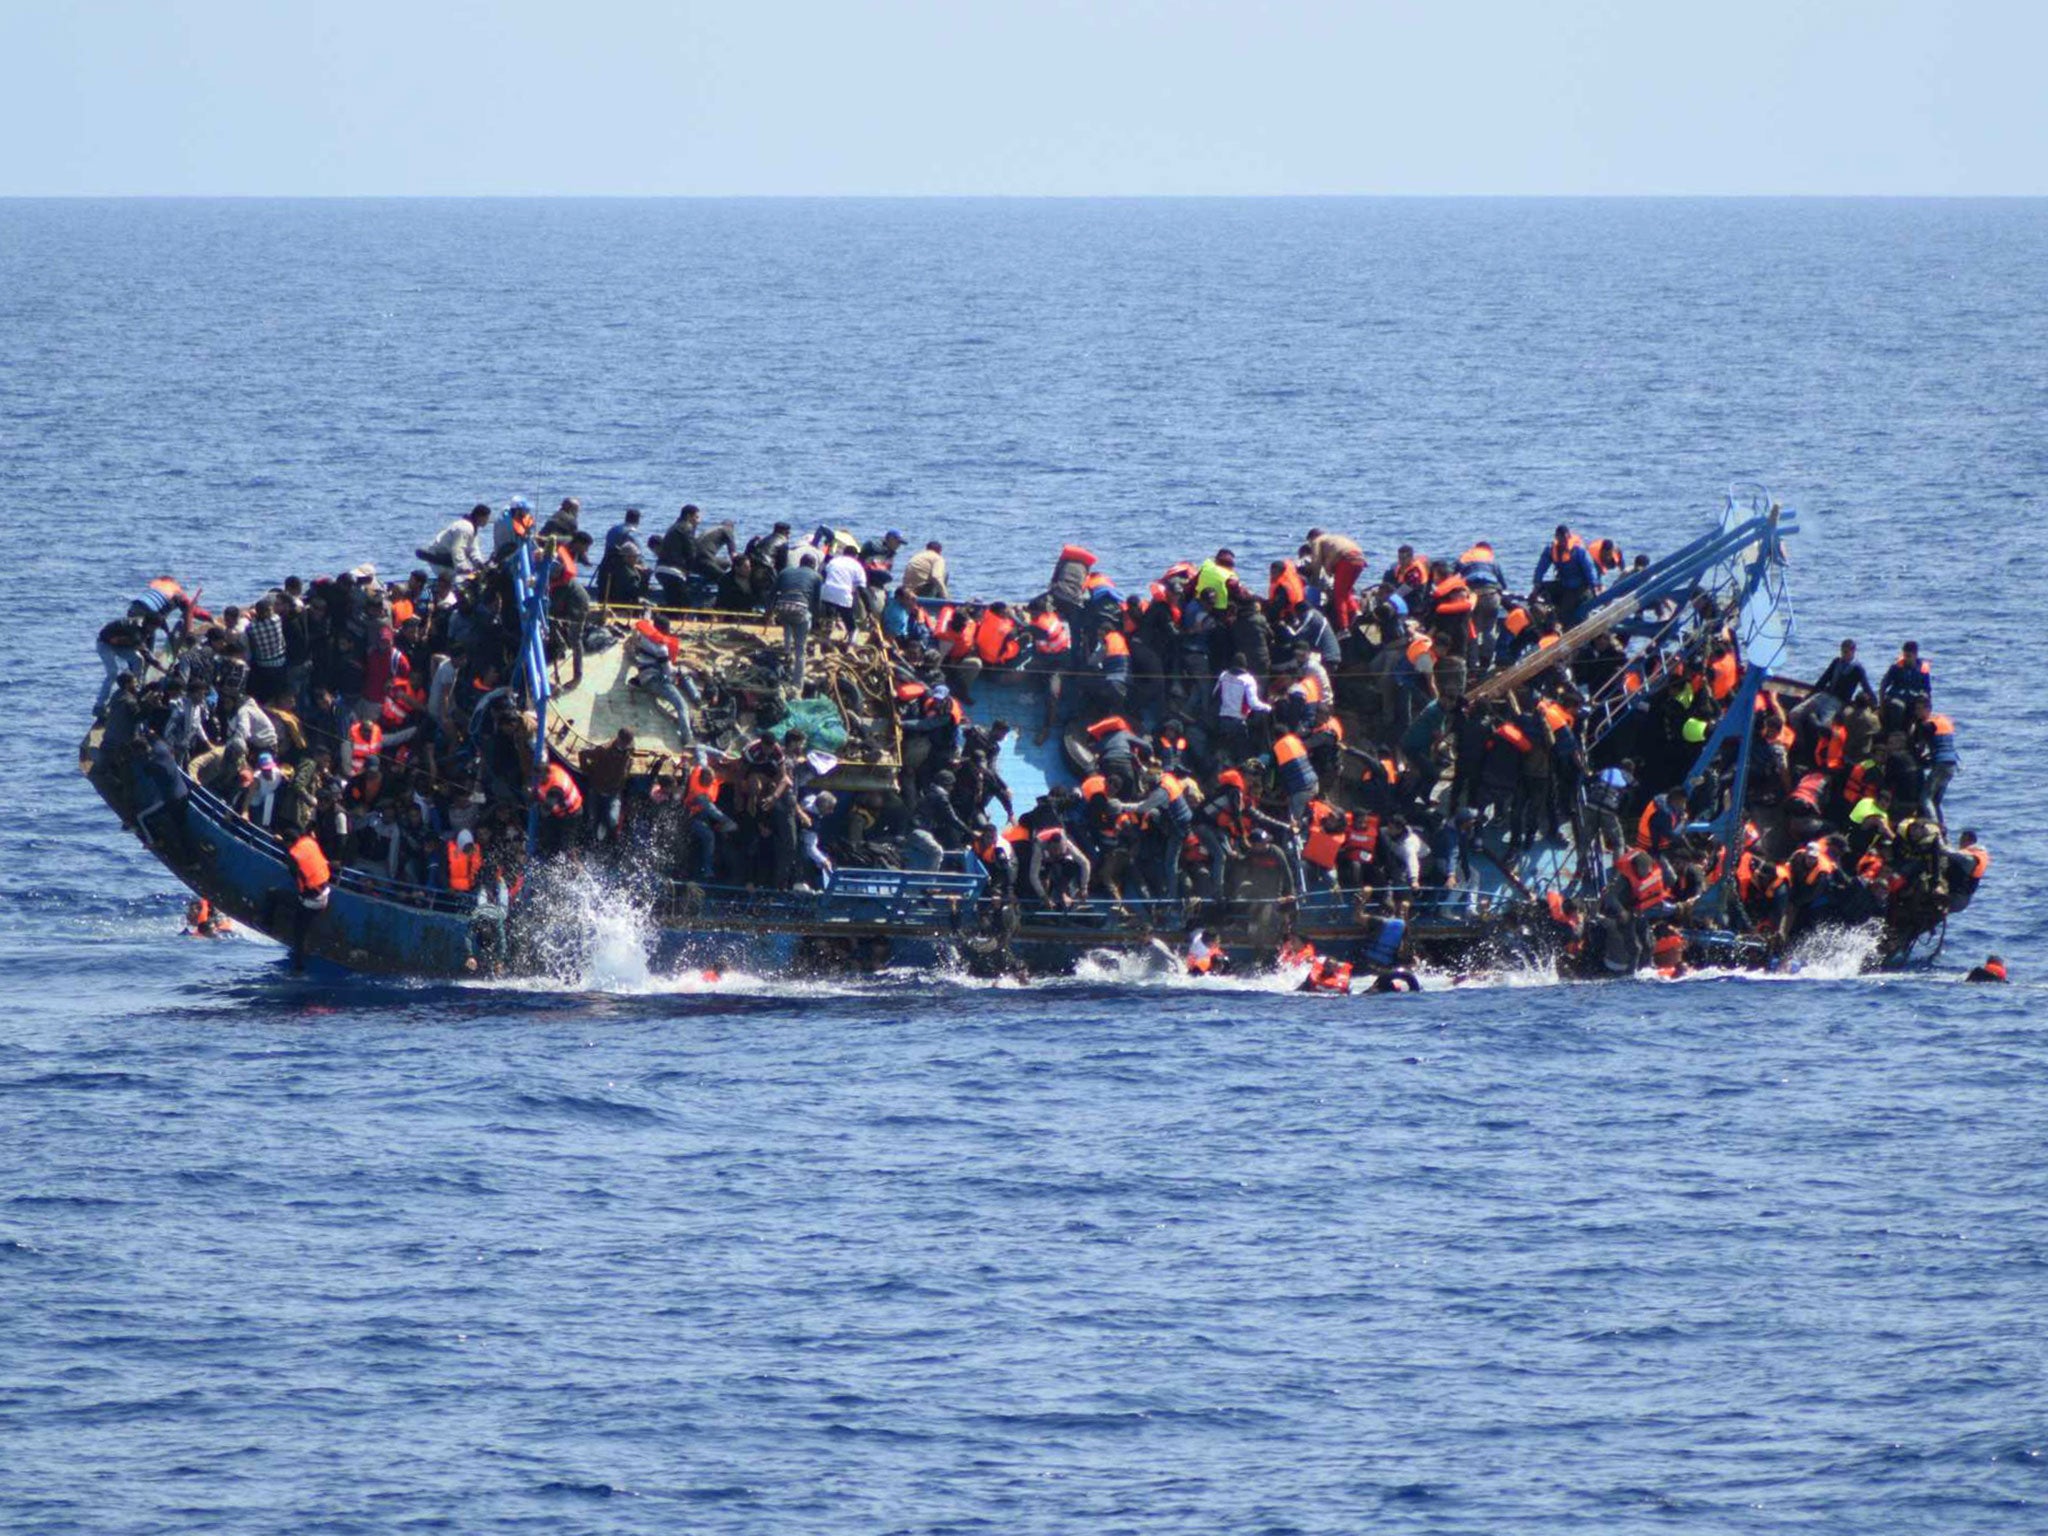 migration to Europe by sea